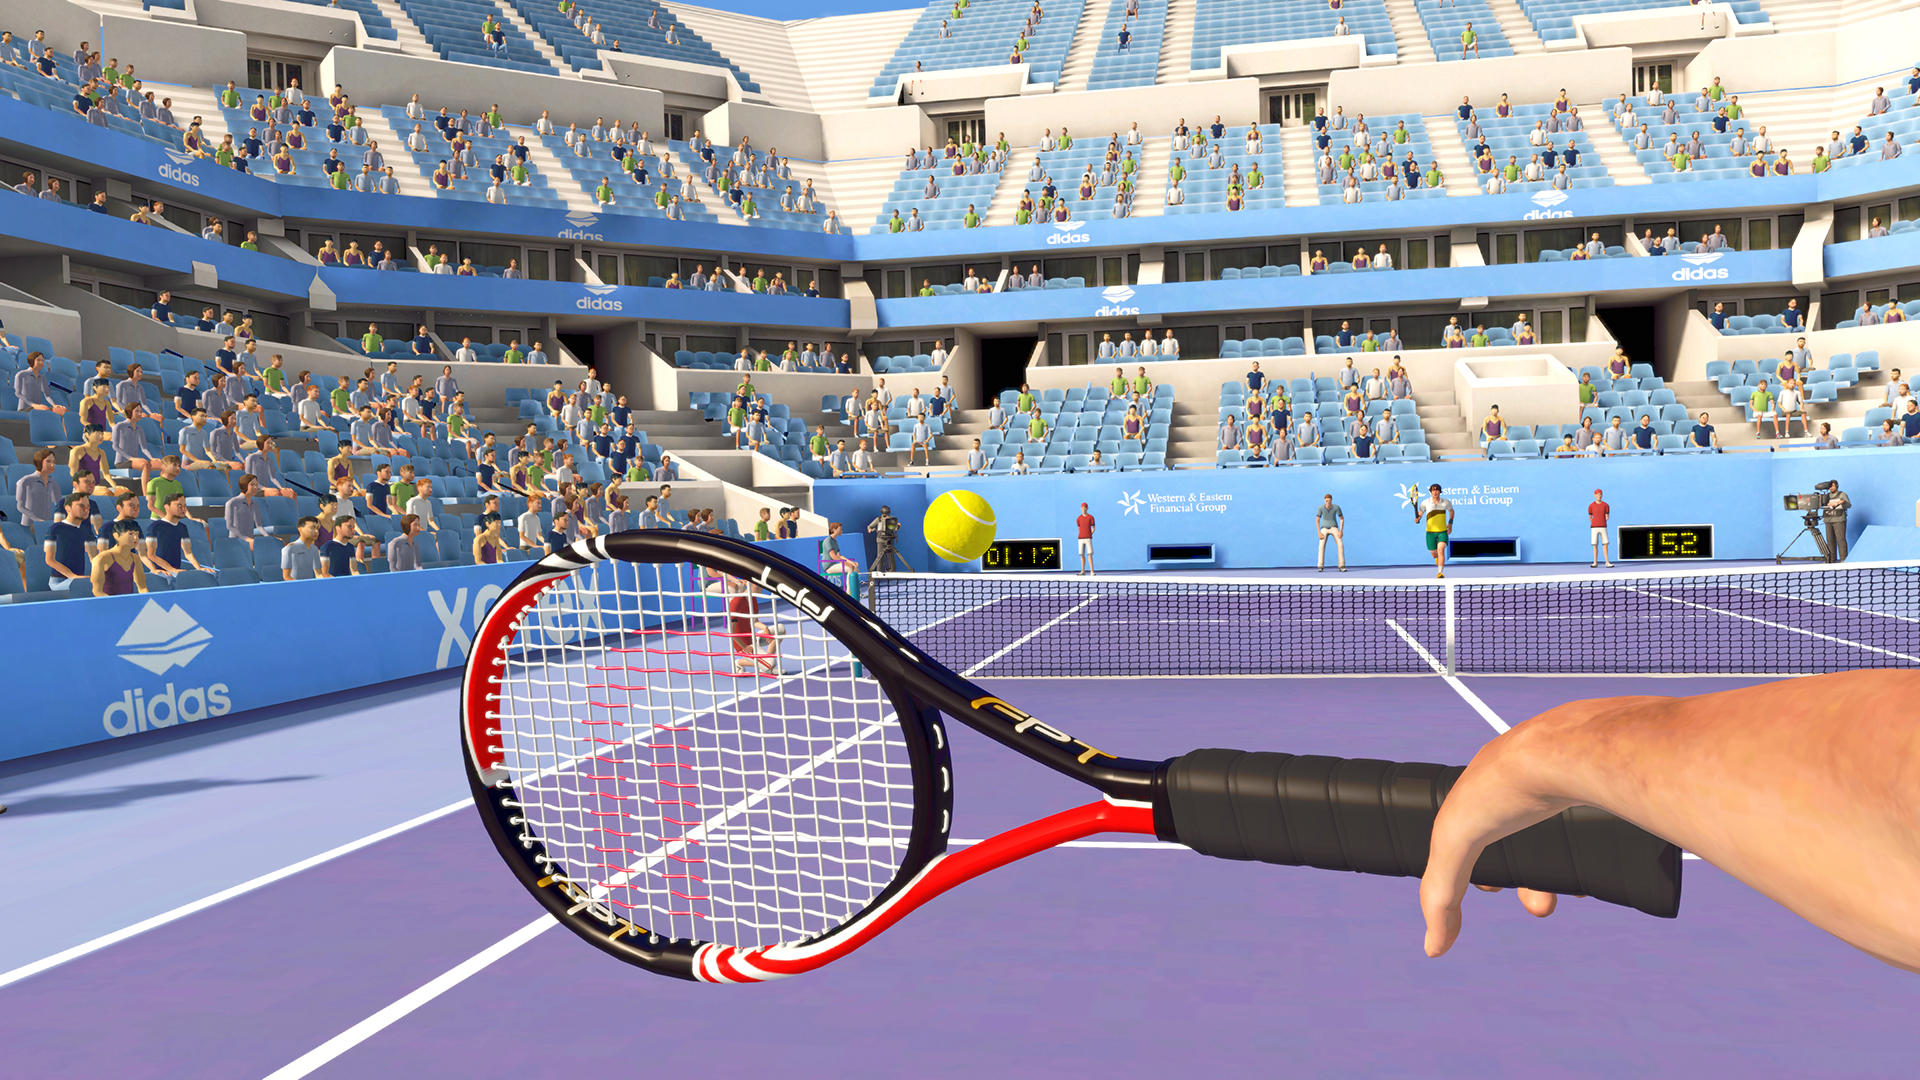 First Person Tennis The Real Tennis Simulator On Steam